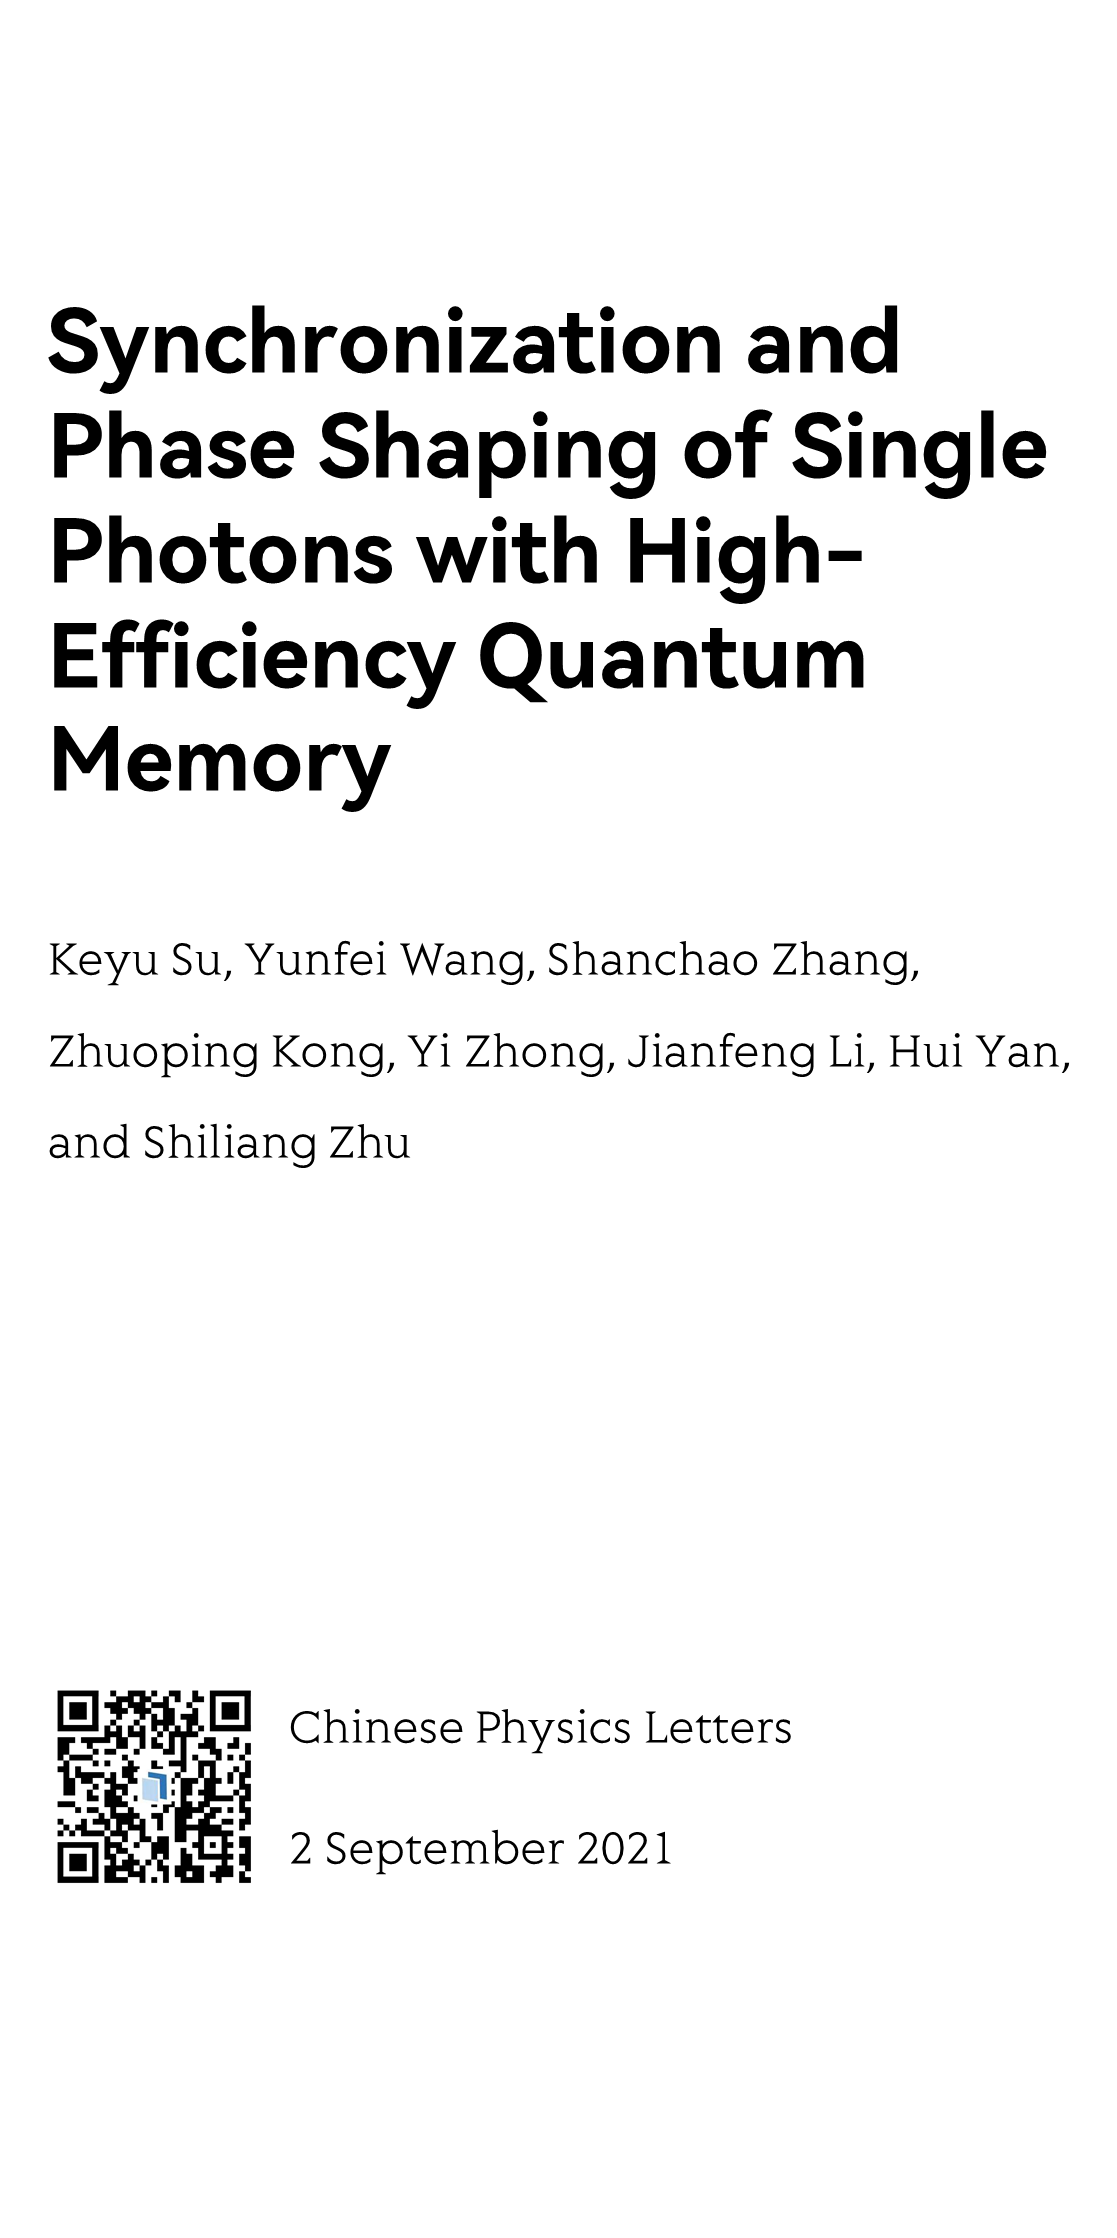 Synchronization and Phase Shaping of Single Photons with High-Efficiency Quantum Memory_1